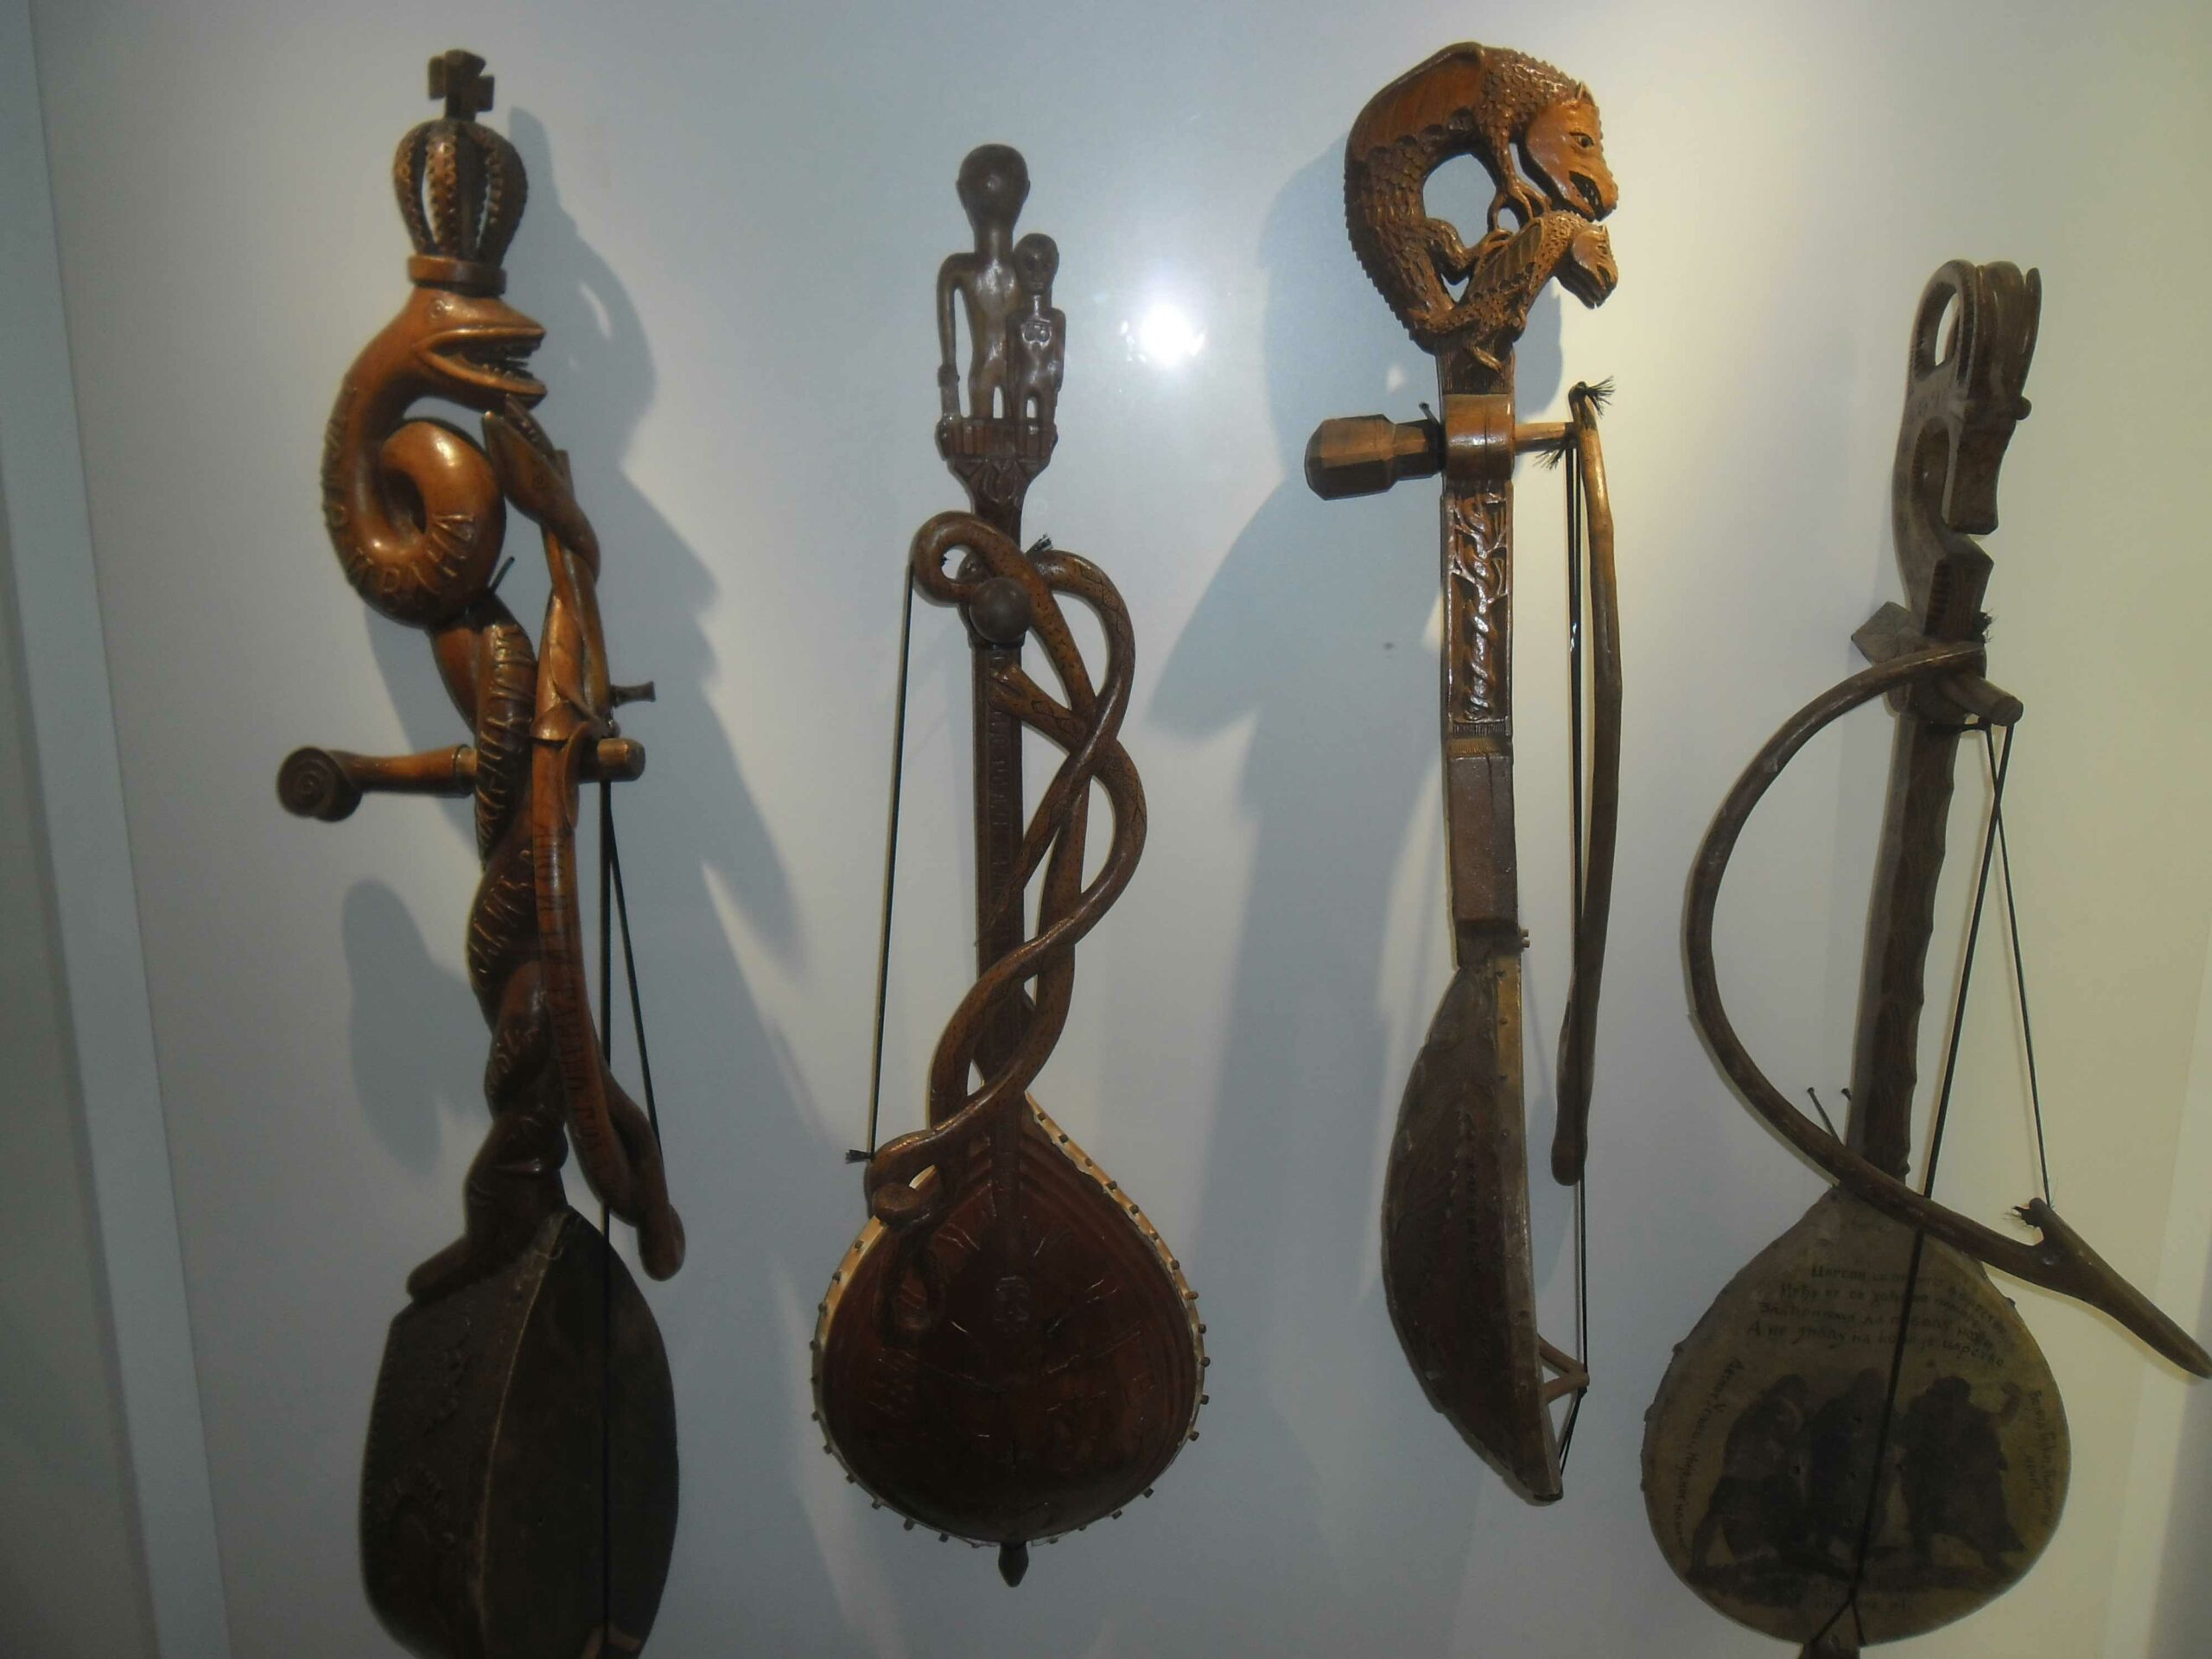 traditional serbian music instruments - gusle